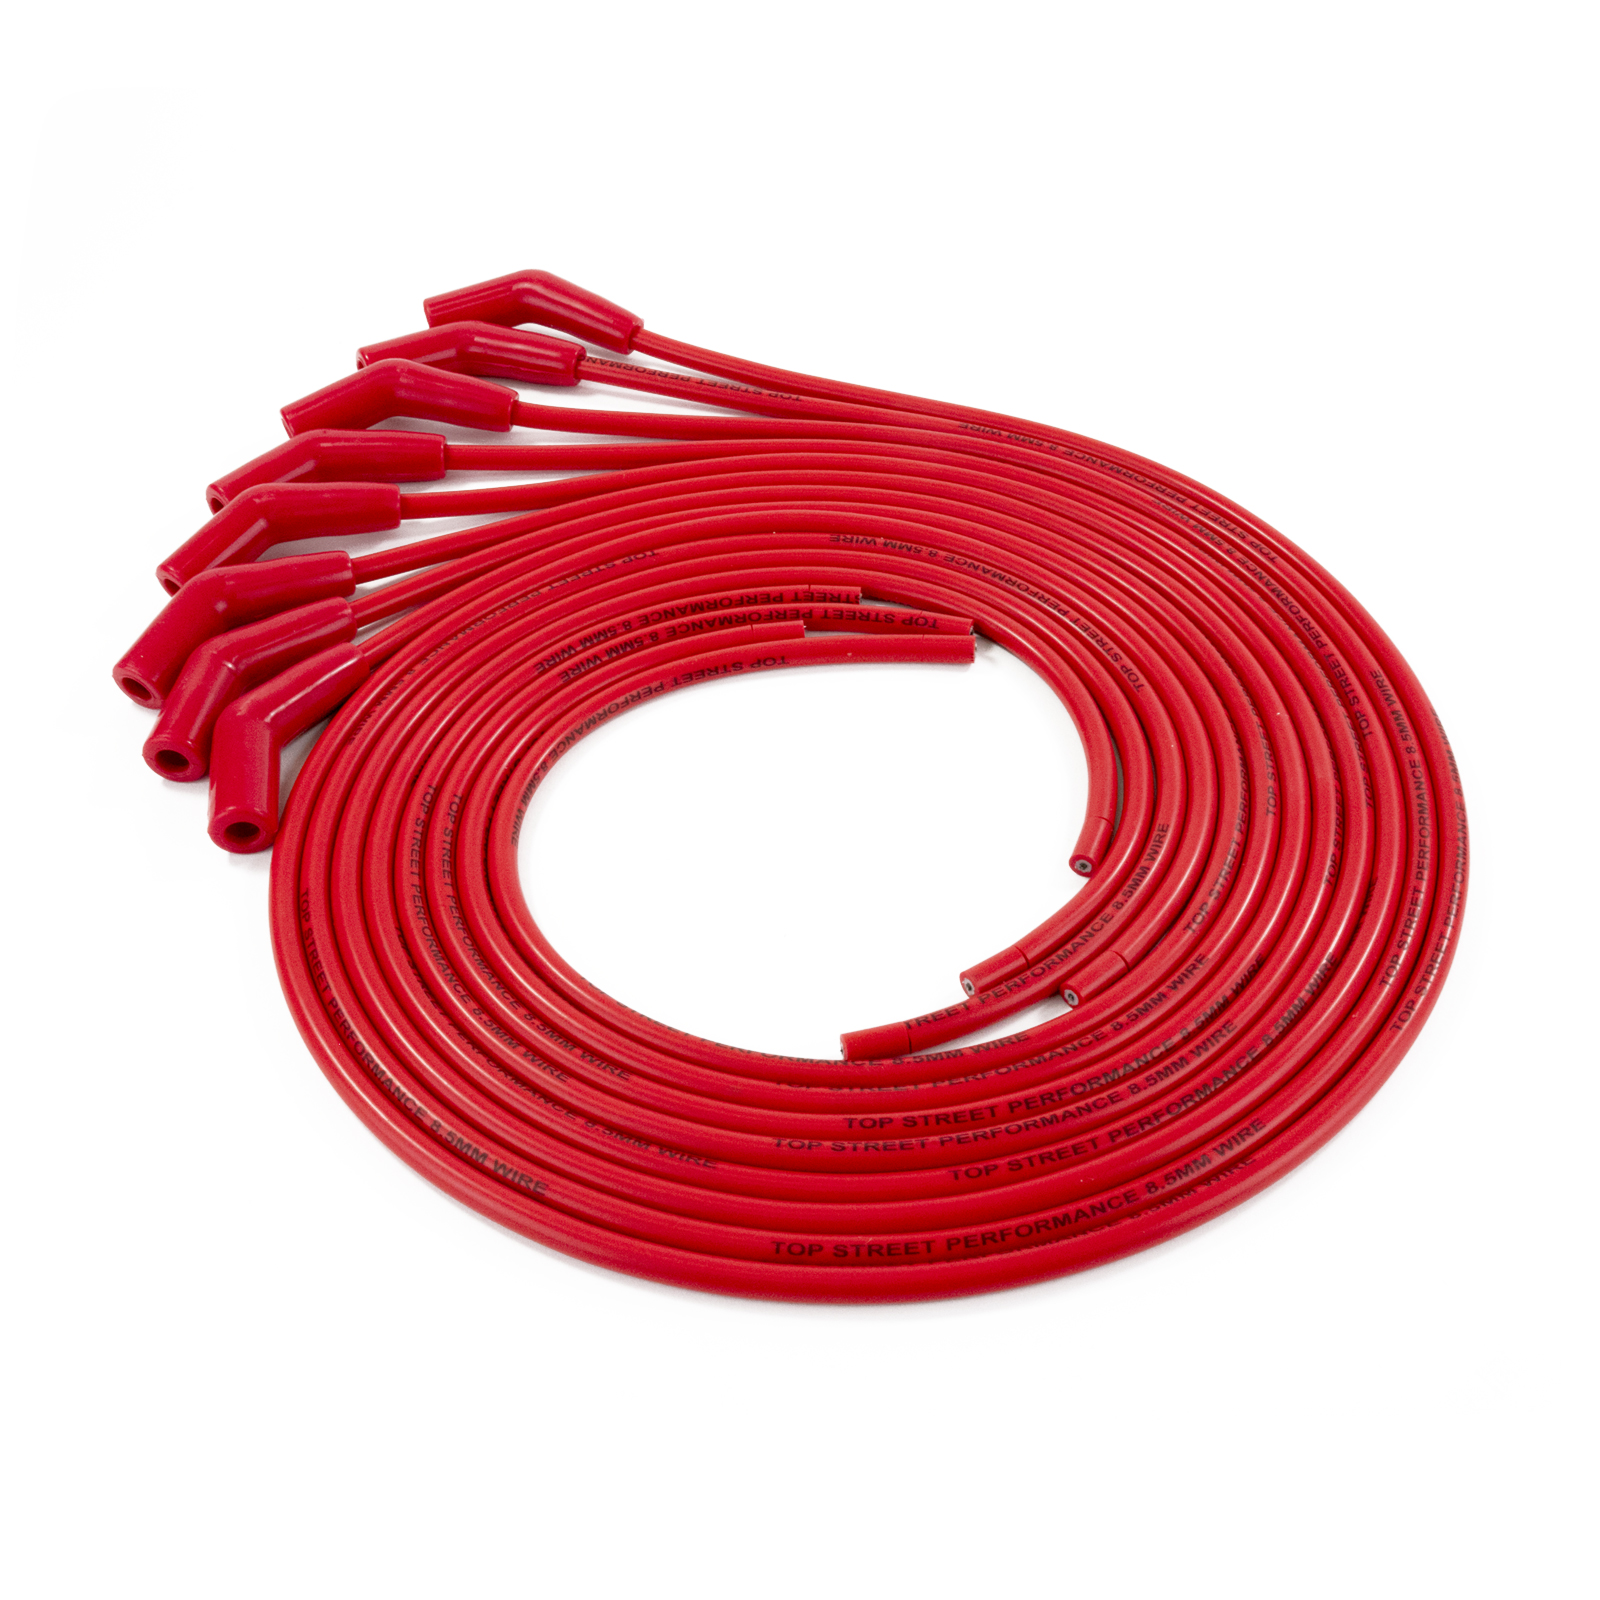 8.5mm Universal Red Ignition Wires with 135? Plug Boots